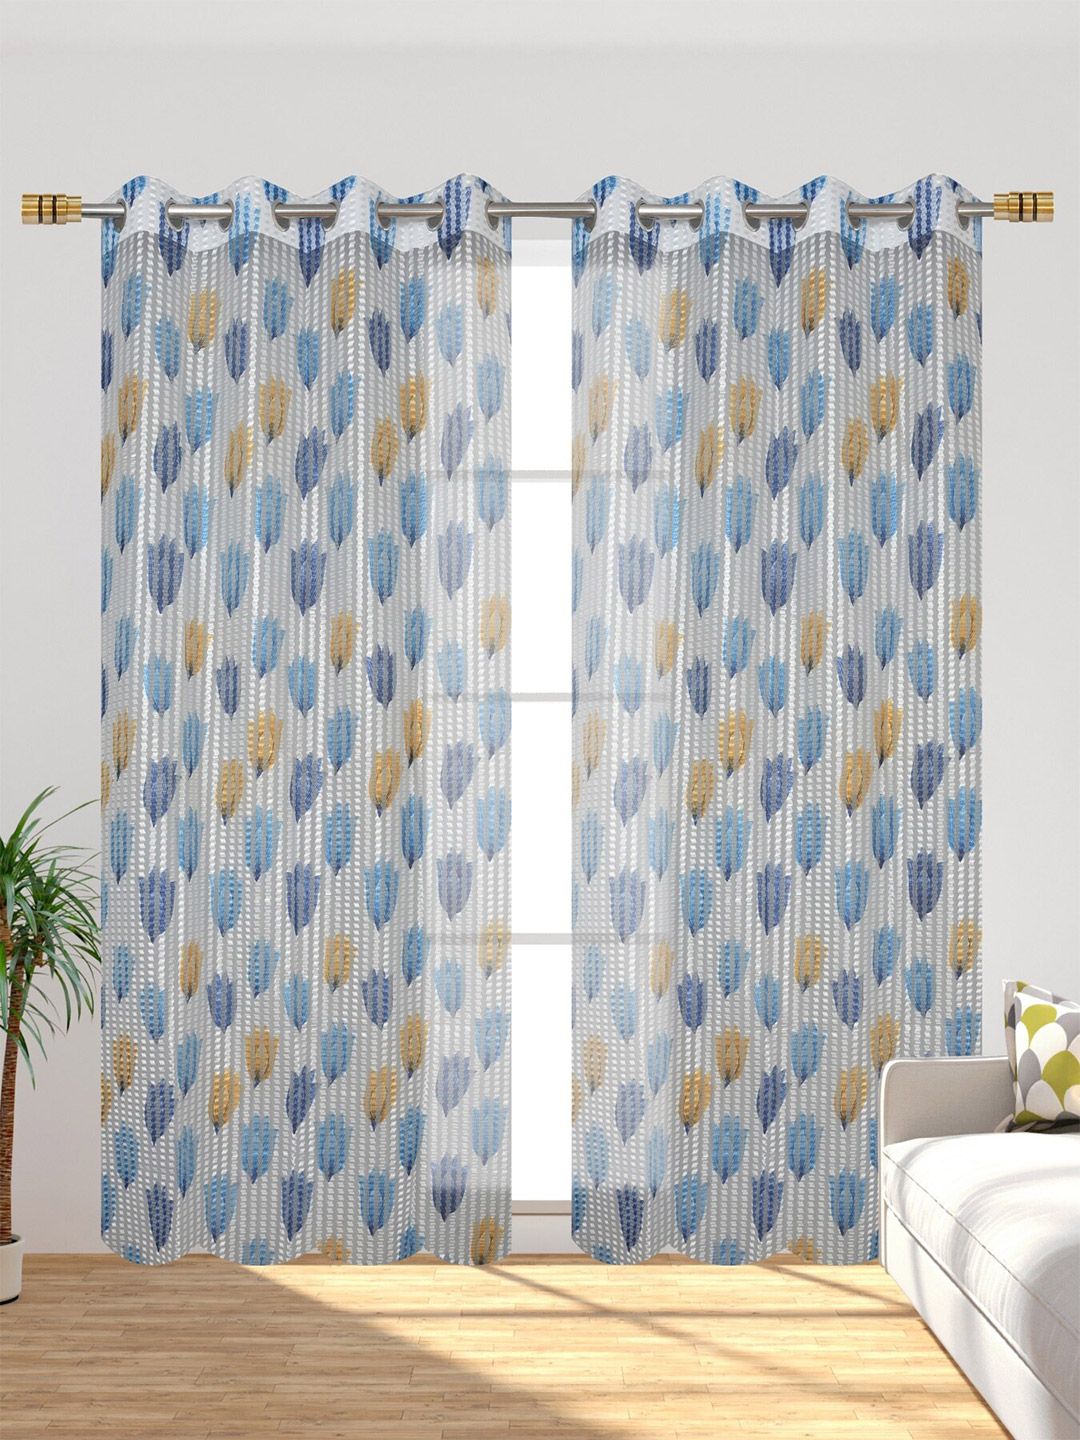 Homefab India Blue Set of 2 Floral Sheer Door Curtain Price in India